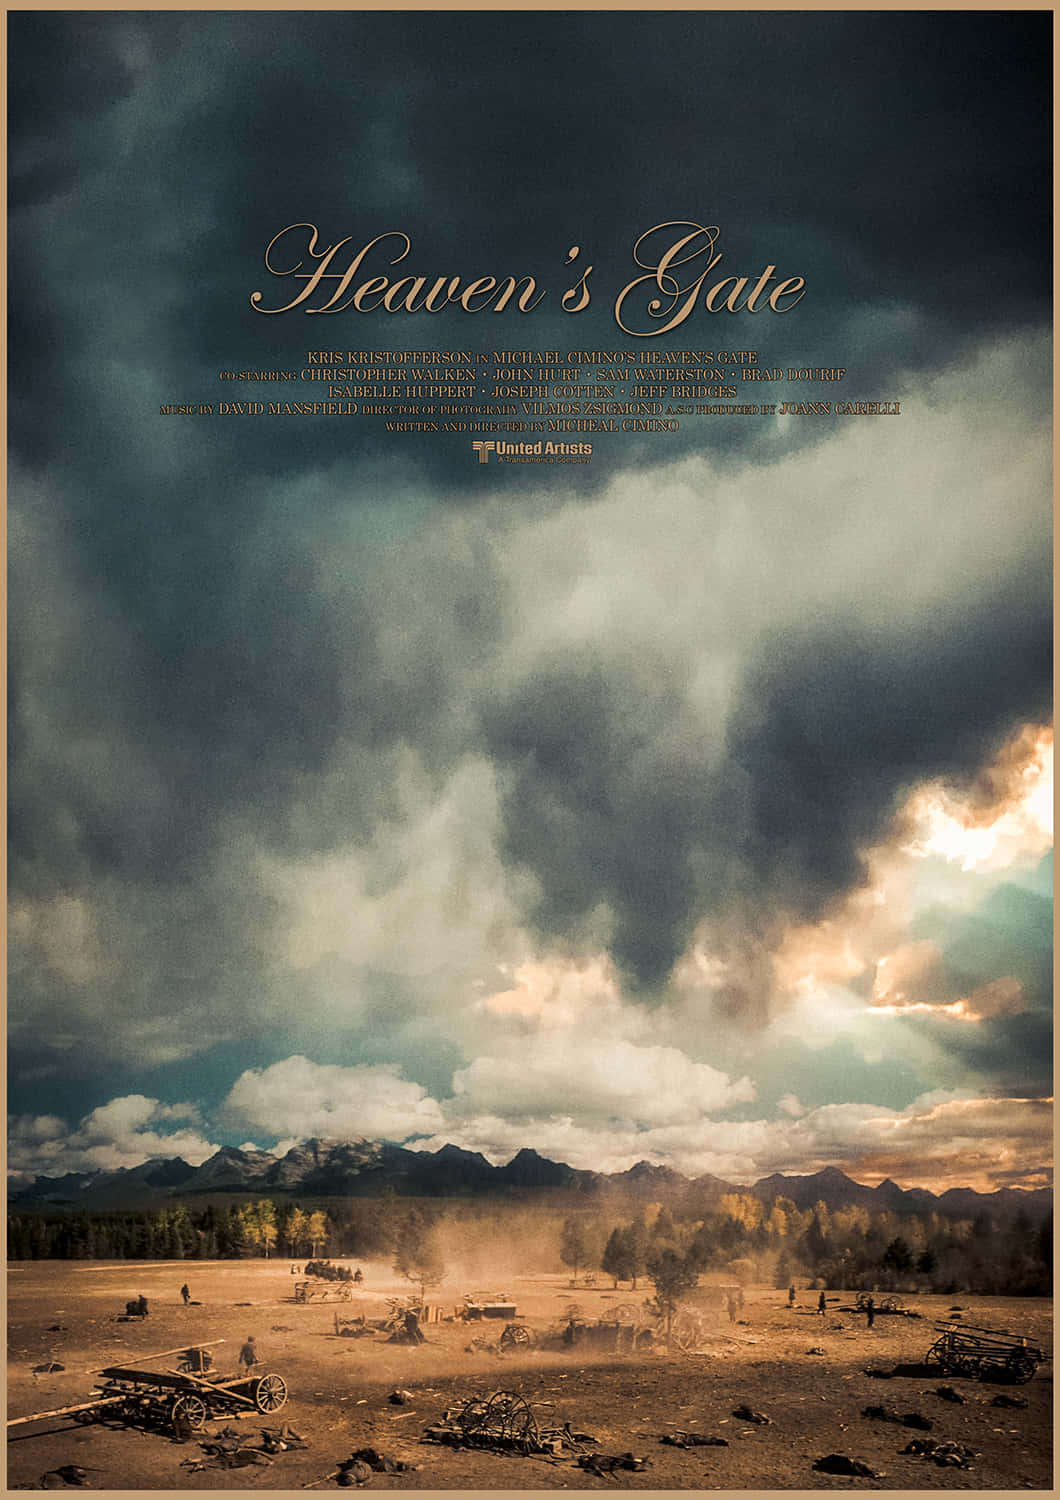 Heaven's Gate - A Movie Poster